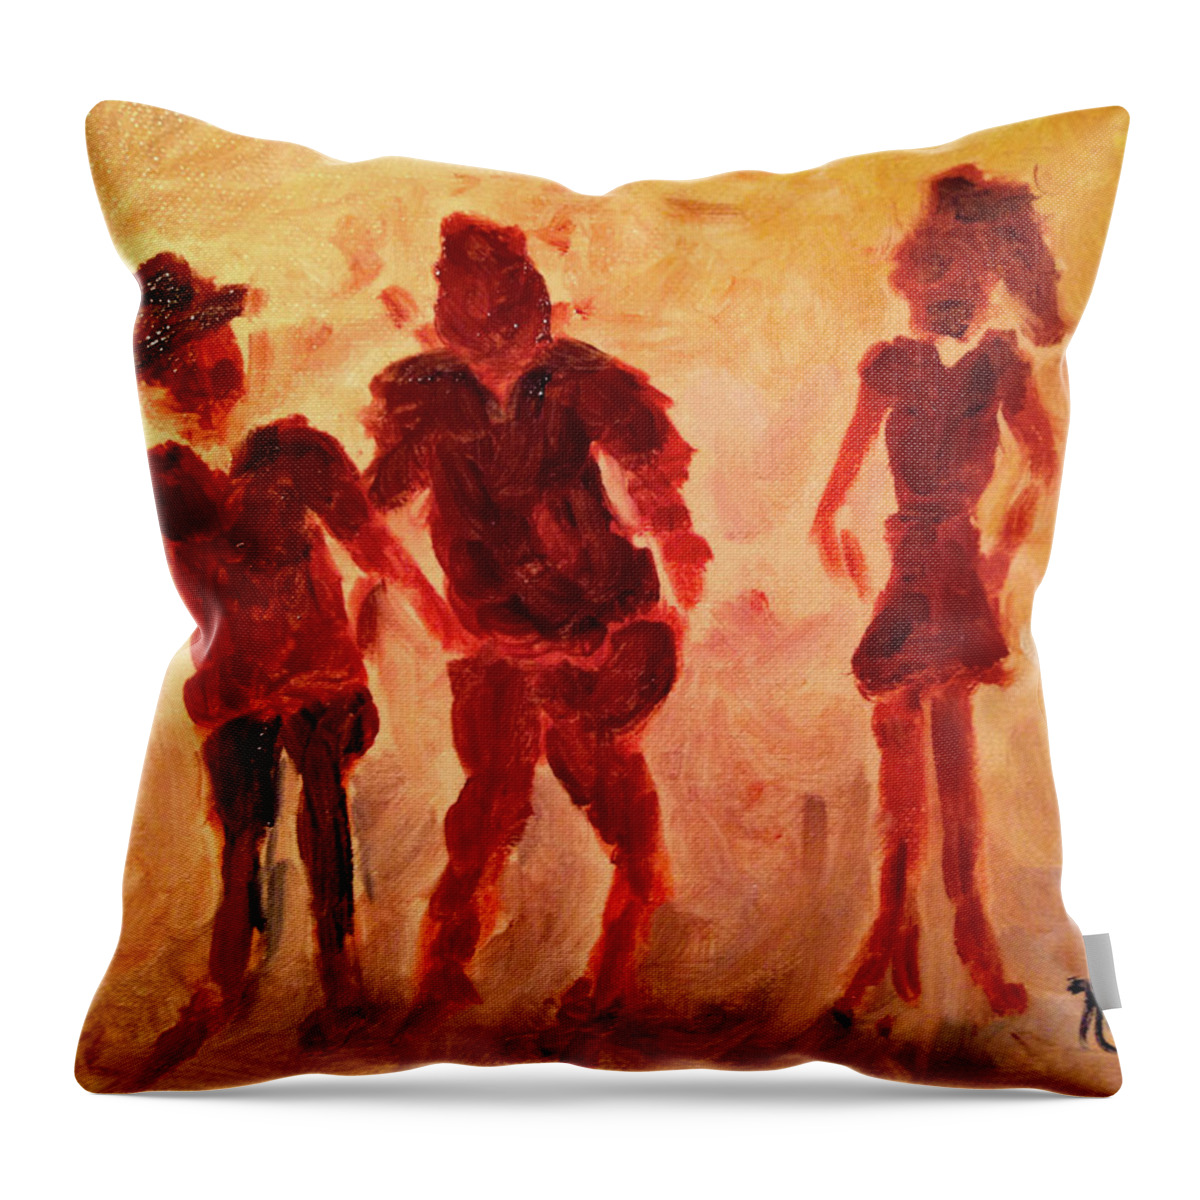 Black People Throw Pillow featuring the painting Double Take #1 by Roxy Rich